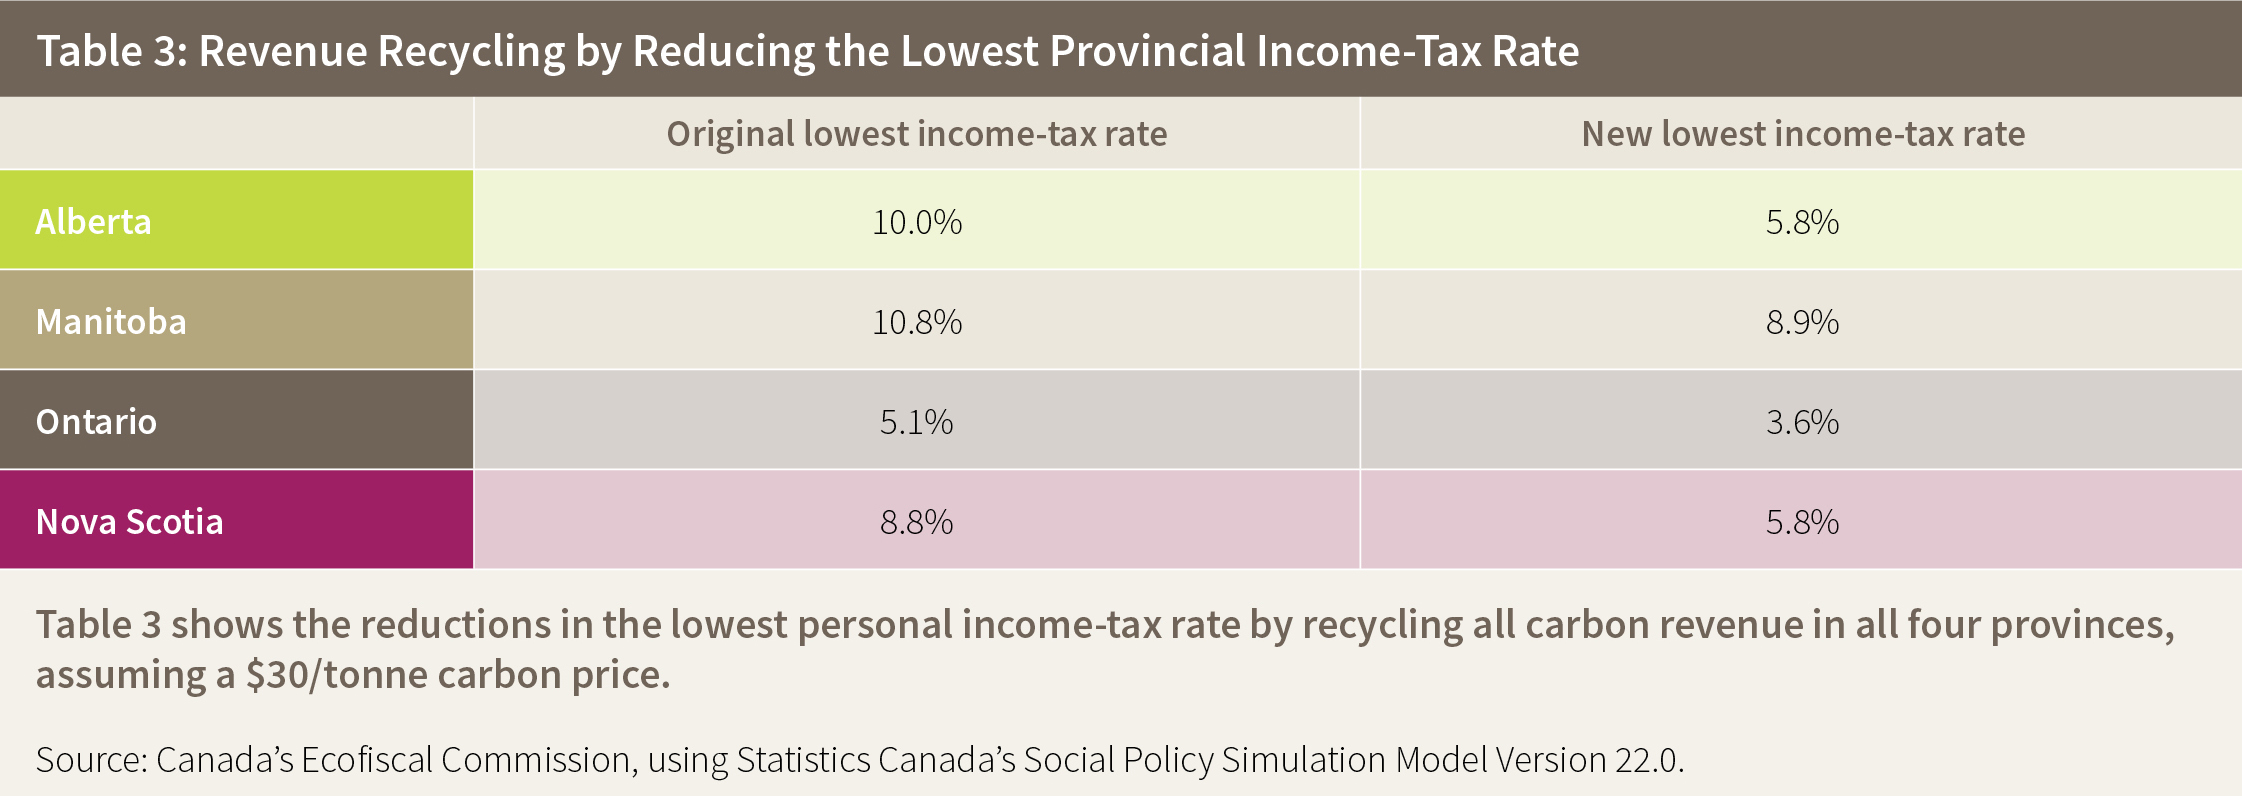 Table 3: Revenue Recycling by Reducing the Lowest Provincial Income-Tax Rate